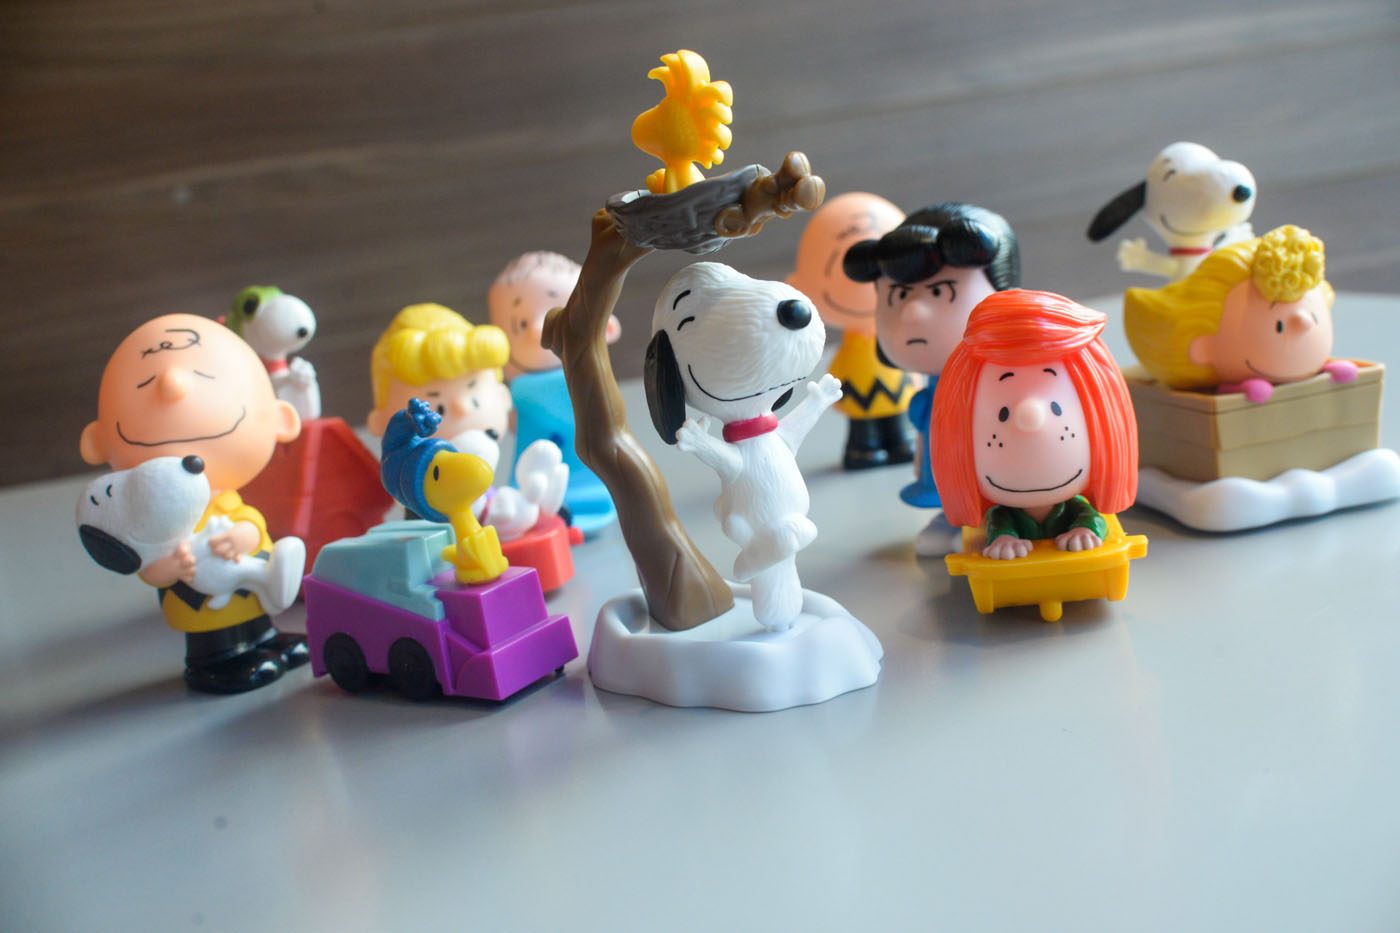 First look: Snoopy, Charlie Brown, Peanuts characters are next McDonalds Happy Meal toys